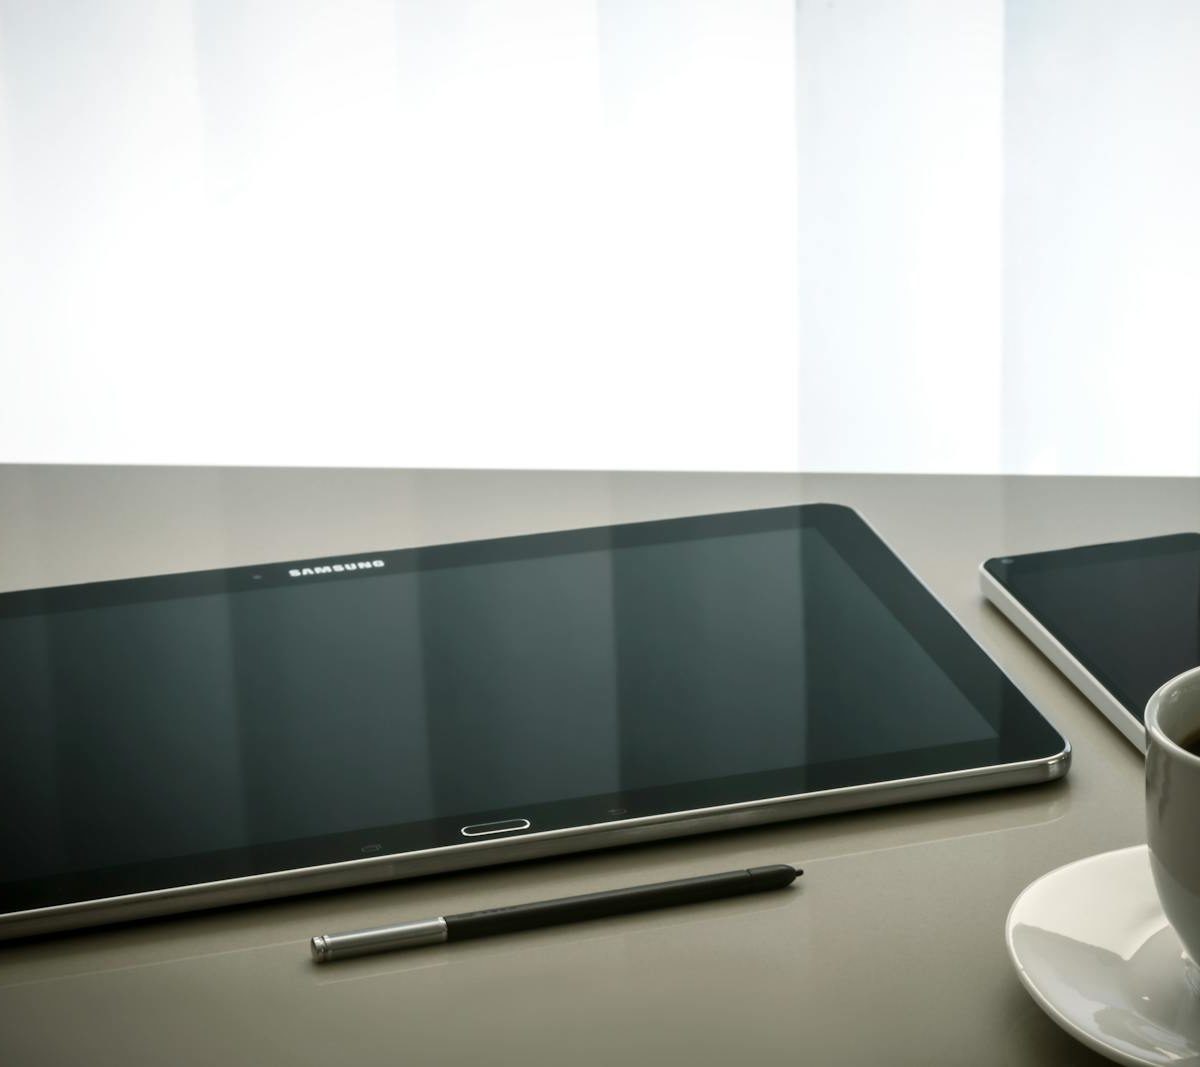 Black Samsung Android Tablet Computer Beside Stylus Pen